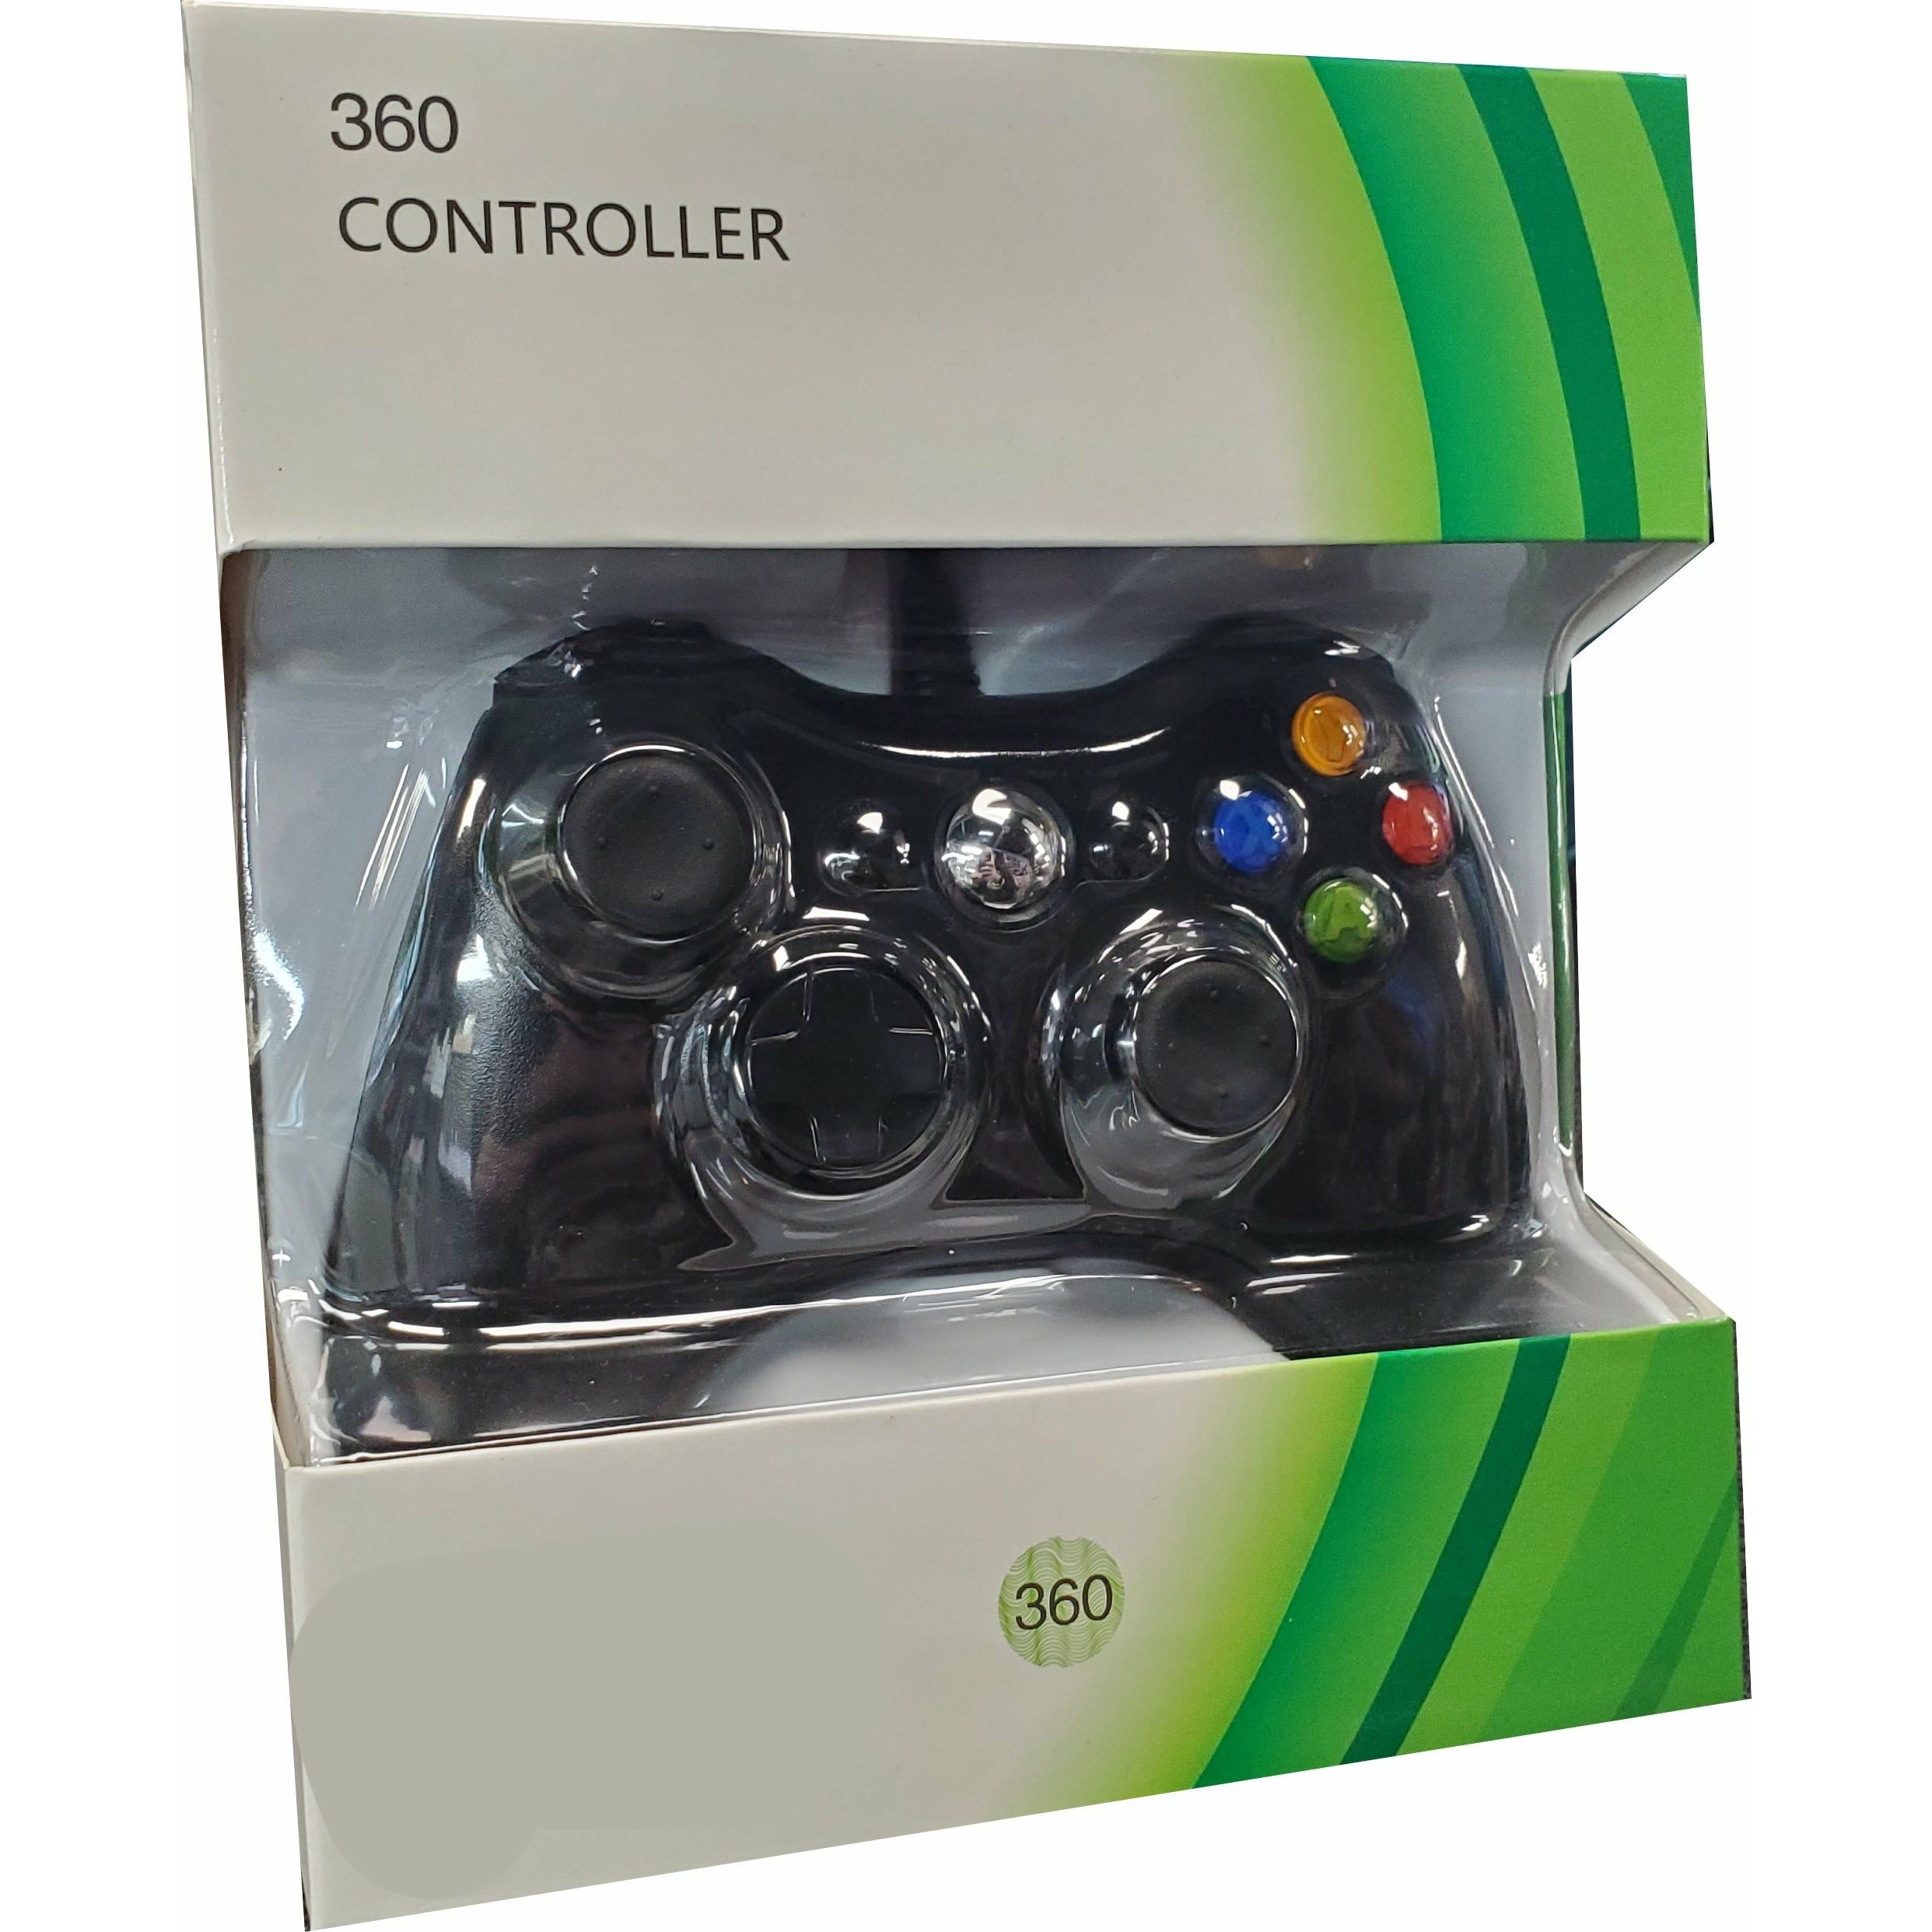 Manette filaire XBOX 360 (tiers)